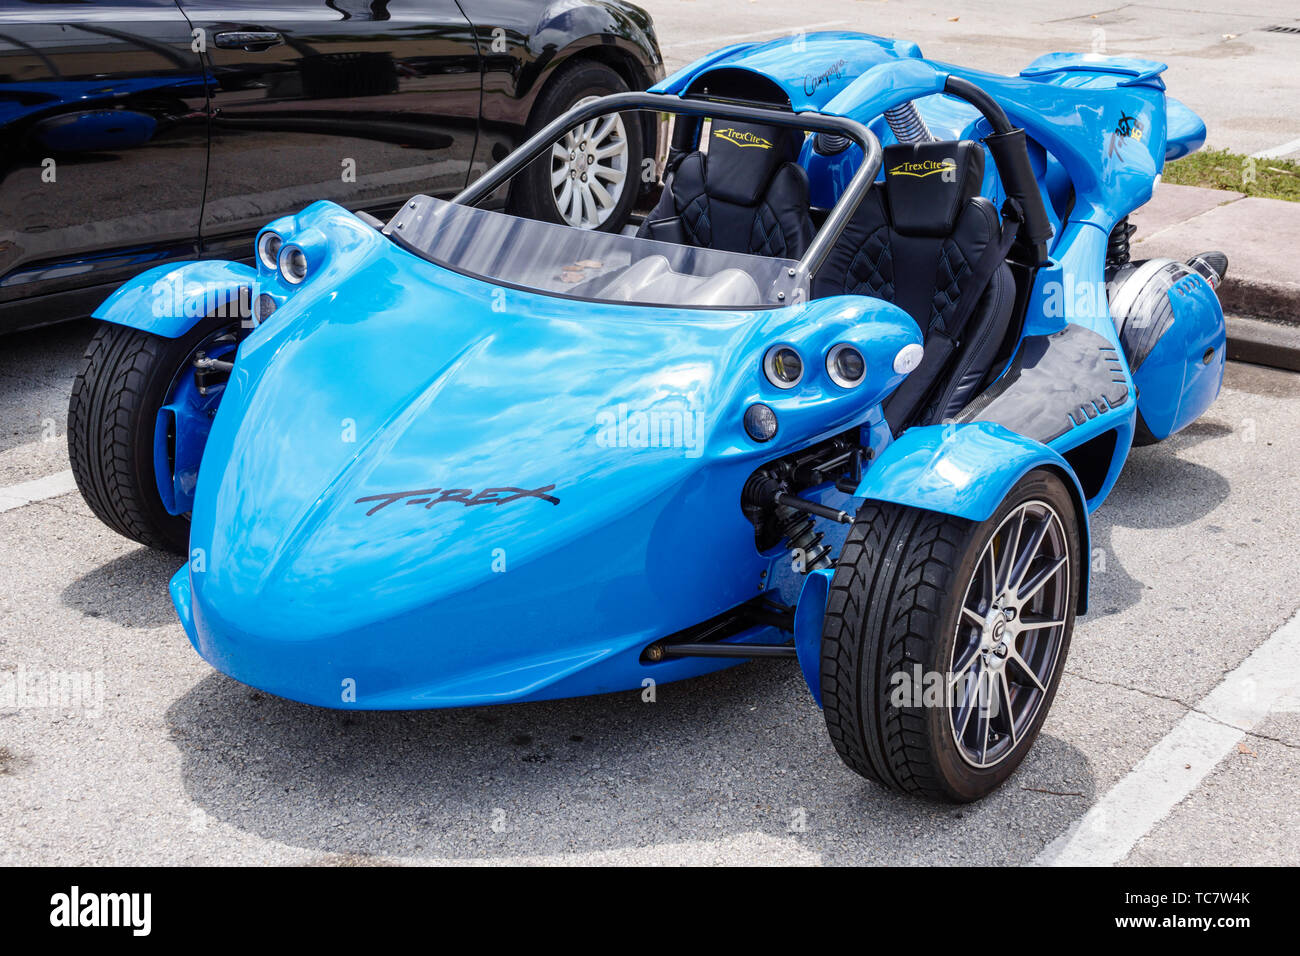 Miami Beach Florida,Campagna T-REX two-seat,three-wheeled motor vehicle,made in Quebec,FL190430024 Stock Photo